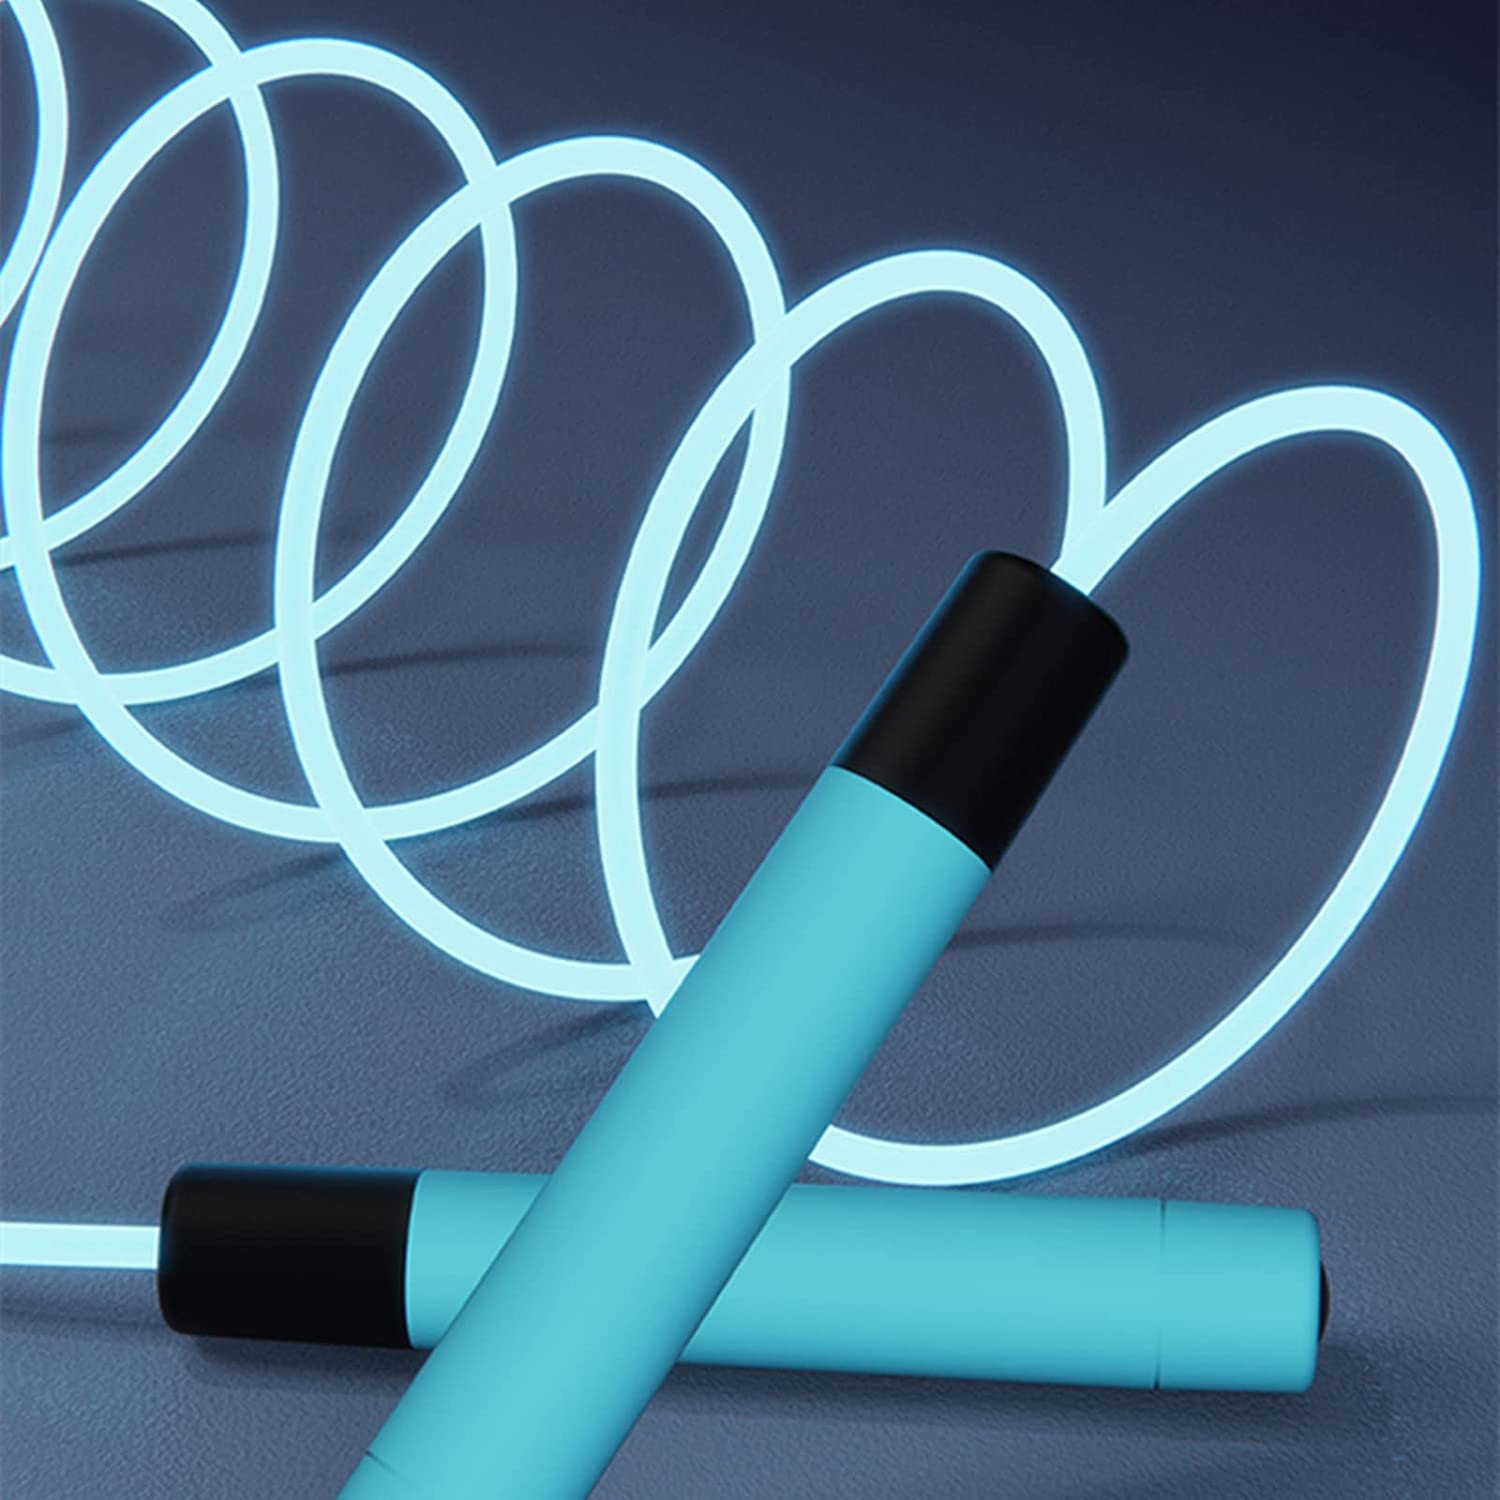 Fitness Skipping Rope LED Light up Jump Rope with Comfortable grips without Tangles Indoor & Outdoor for Men, Women and Children Workouts and Weight Loss